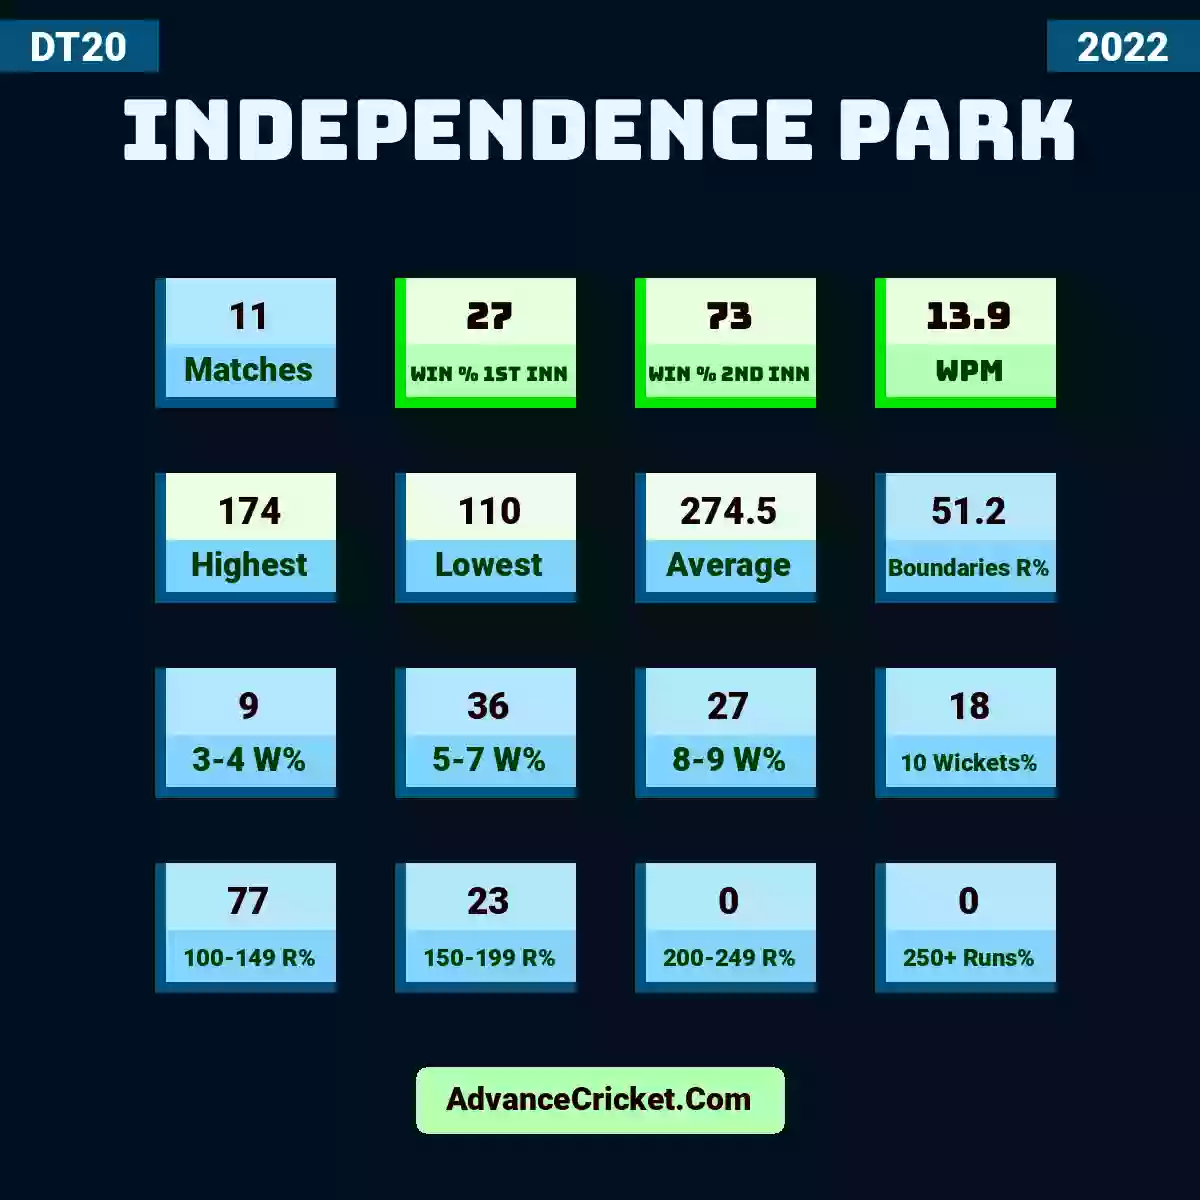 Image showing Independence Park with Matches: 11, Win % 1st Inn: 27, Win % 2nd Inn: 73, WPM: 13.9, Highest: 174, Lowest: 110, Average: 274.5, Boundaries R%: 51.2, 3-4 W%: 9, 5-7 W%: 36, 8-9 W%: 27, 10 Wickets%: 18, 100-149 R%: 77, 150-199 R%: 23, 200-249 R%: 0, 250+ Runs%: 0.